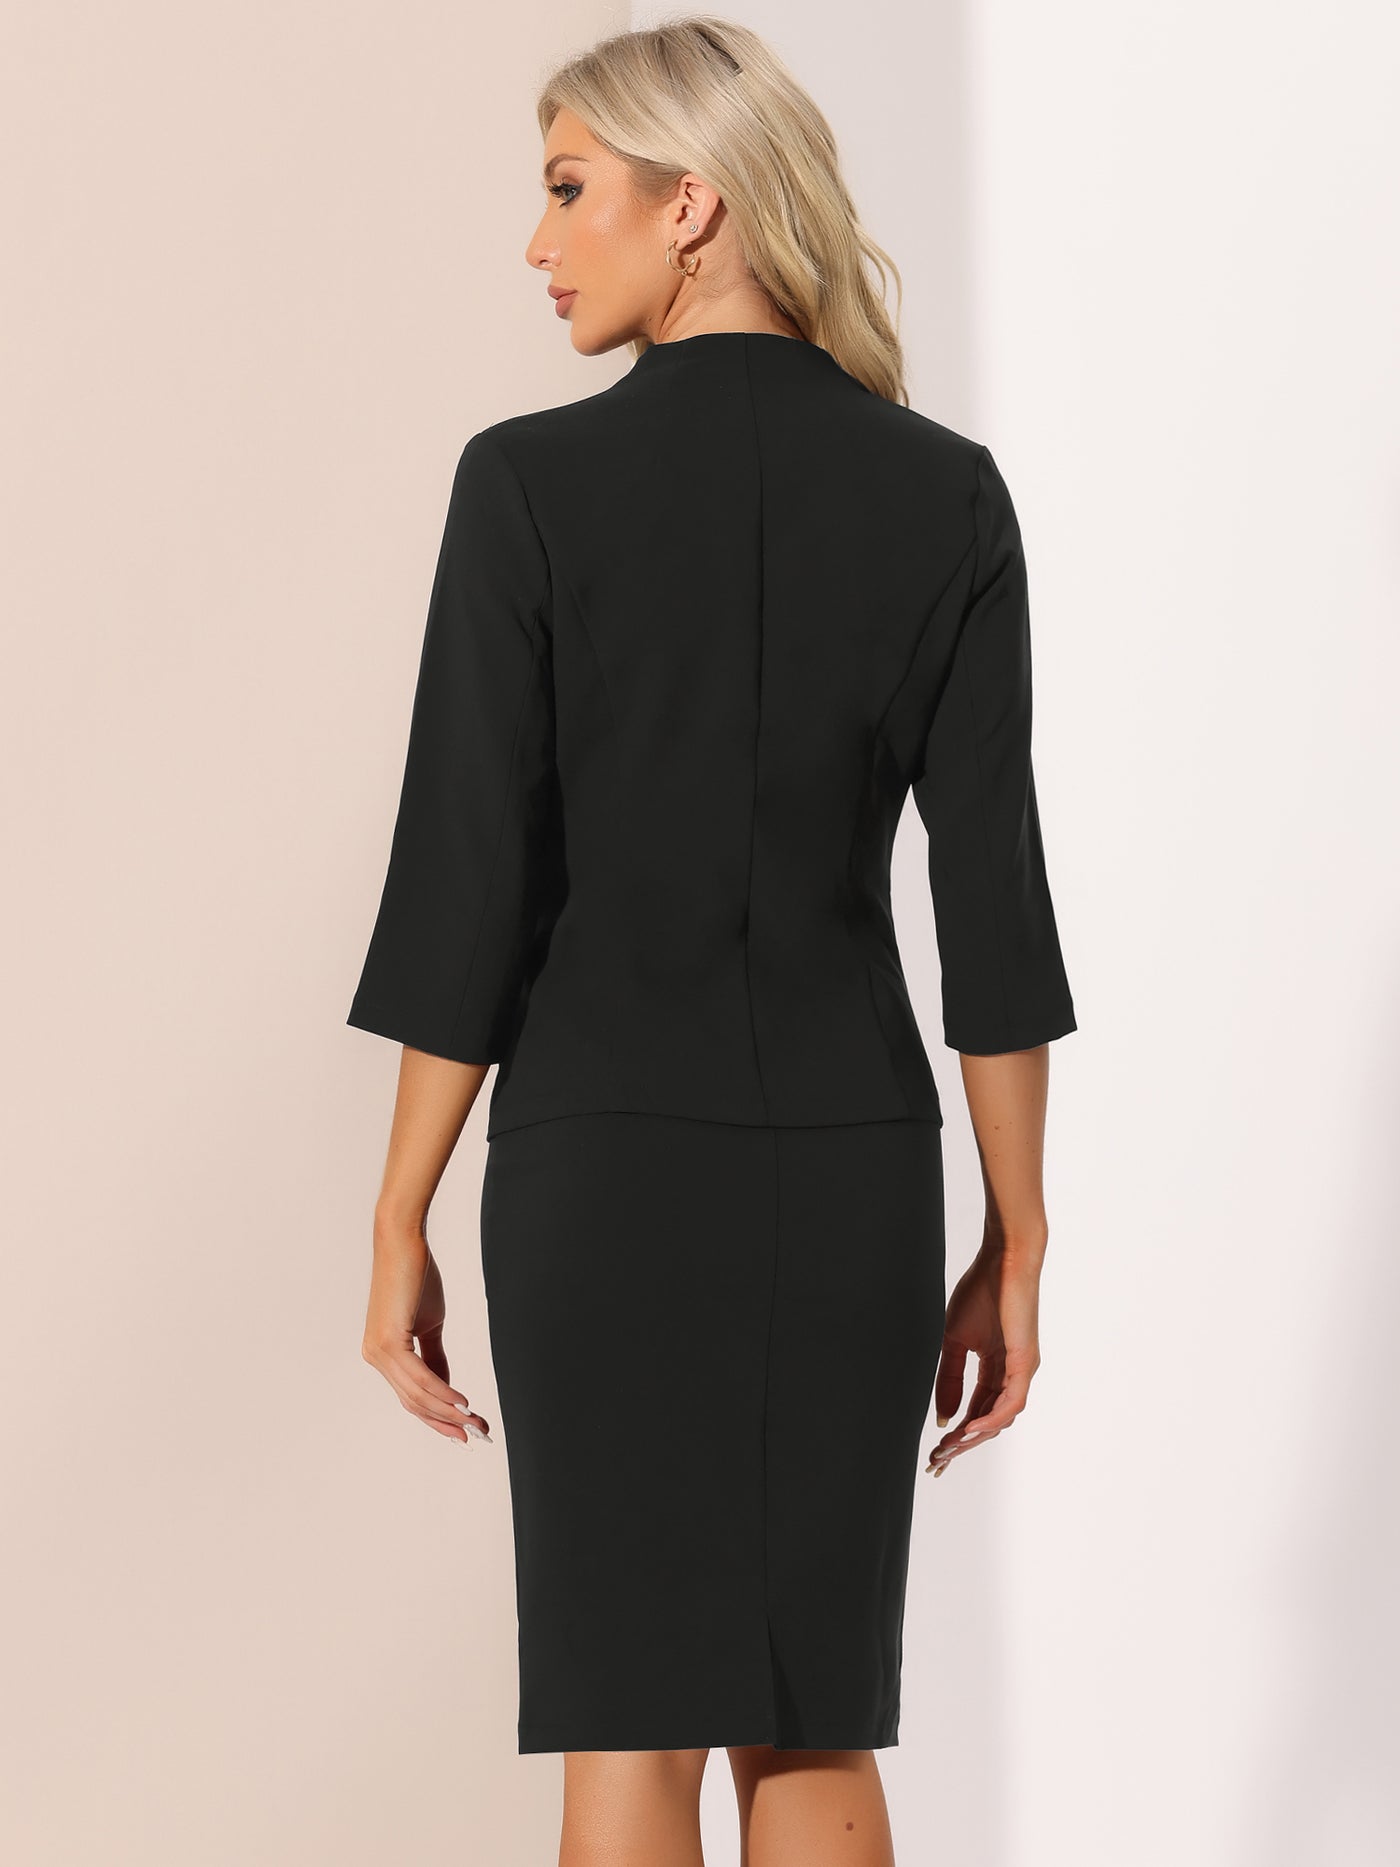 Allegra K 2 Pieces Office Work Outfit Collarless Blazer and Pencil Skirt Business Skirt Suit Set